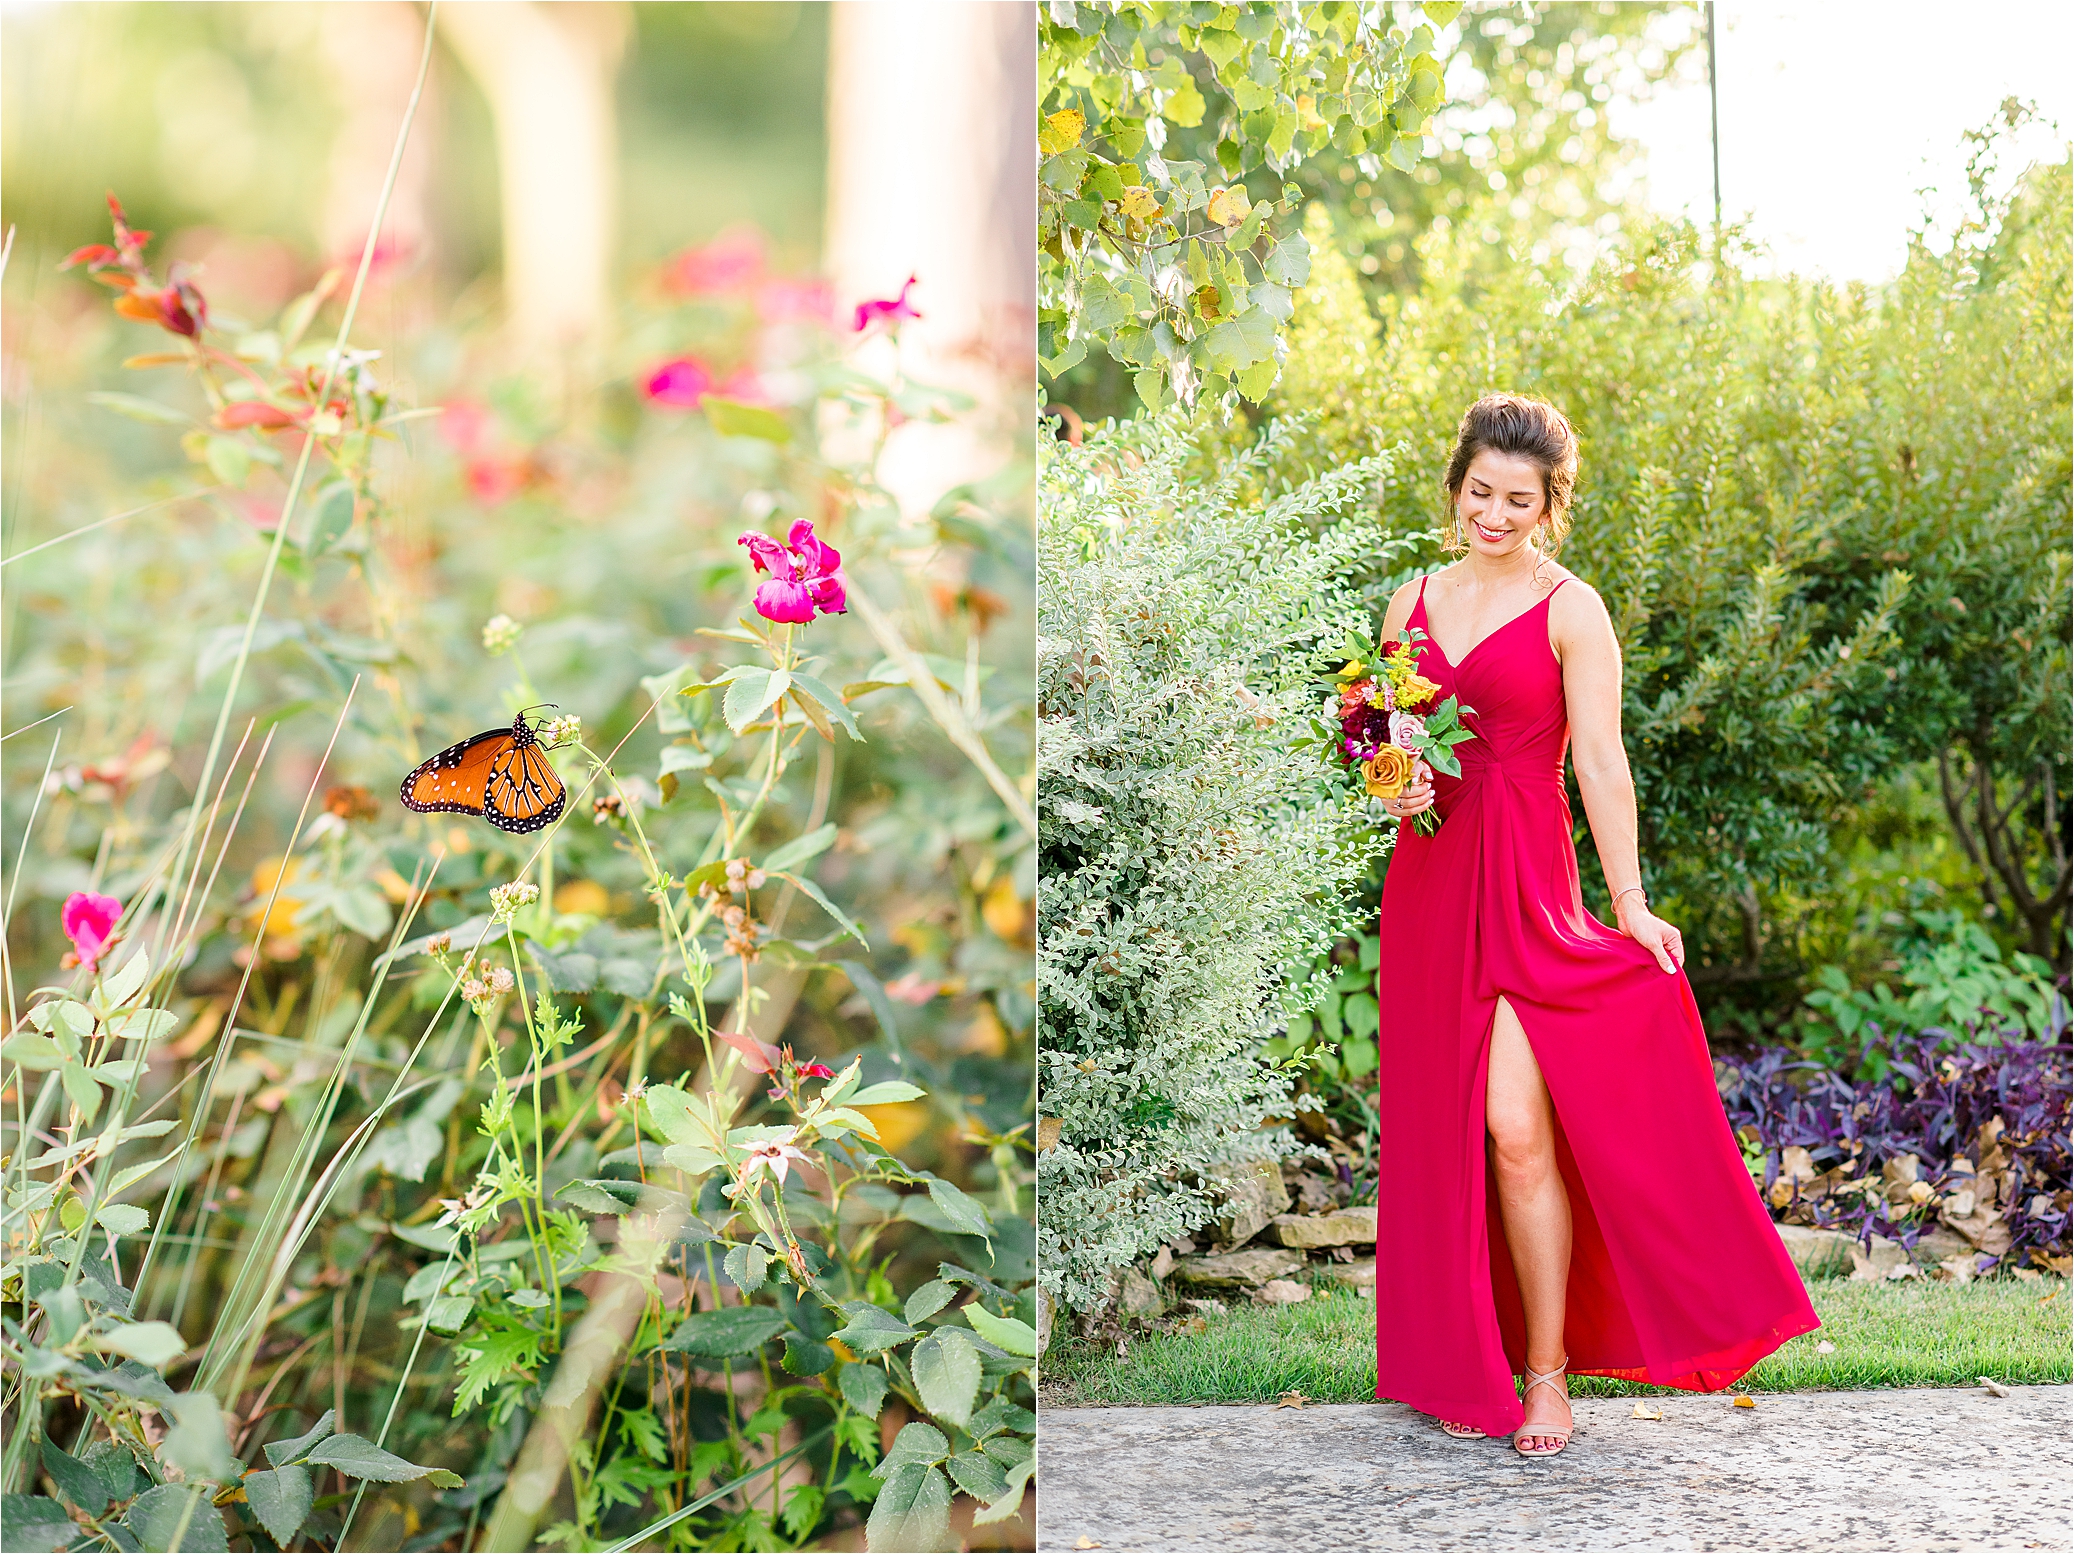 A bridesmaid in a red dress surrounded by greenery and butterflies at Paniolo Ranch in Boerne, Texas